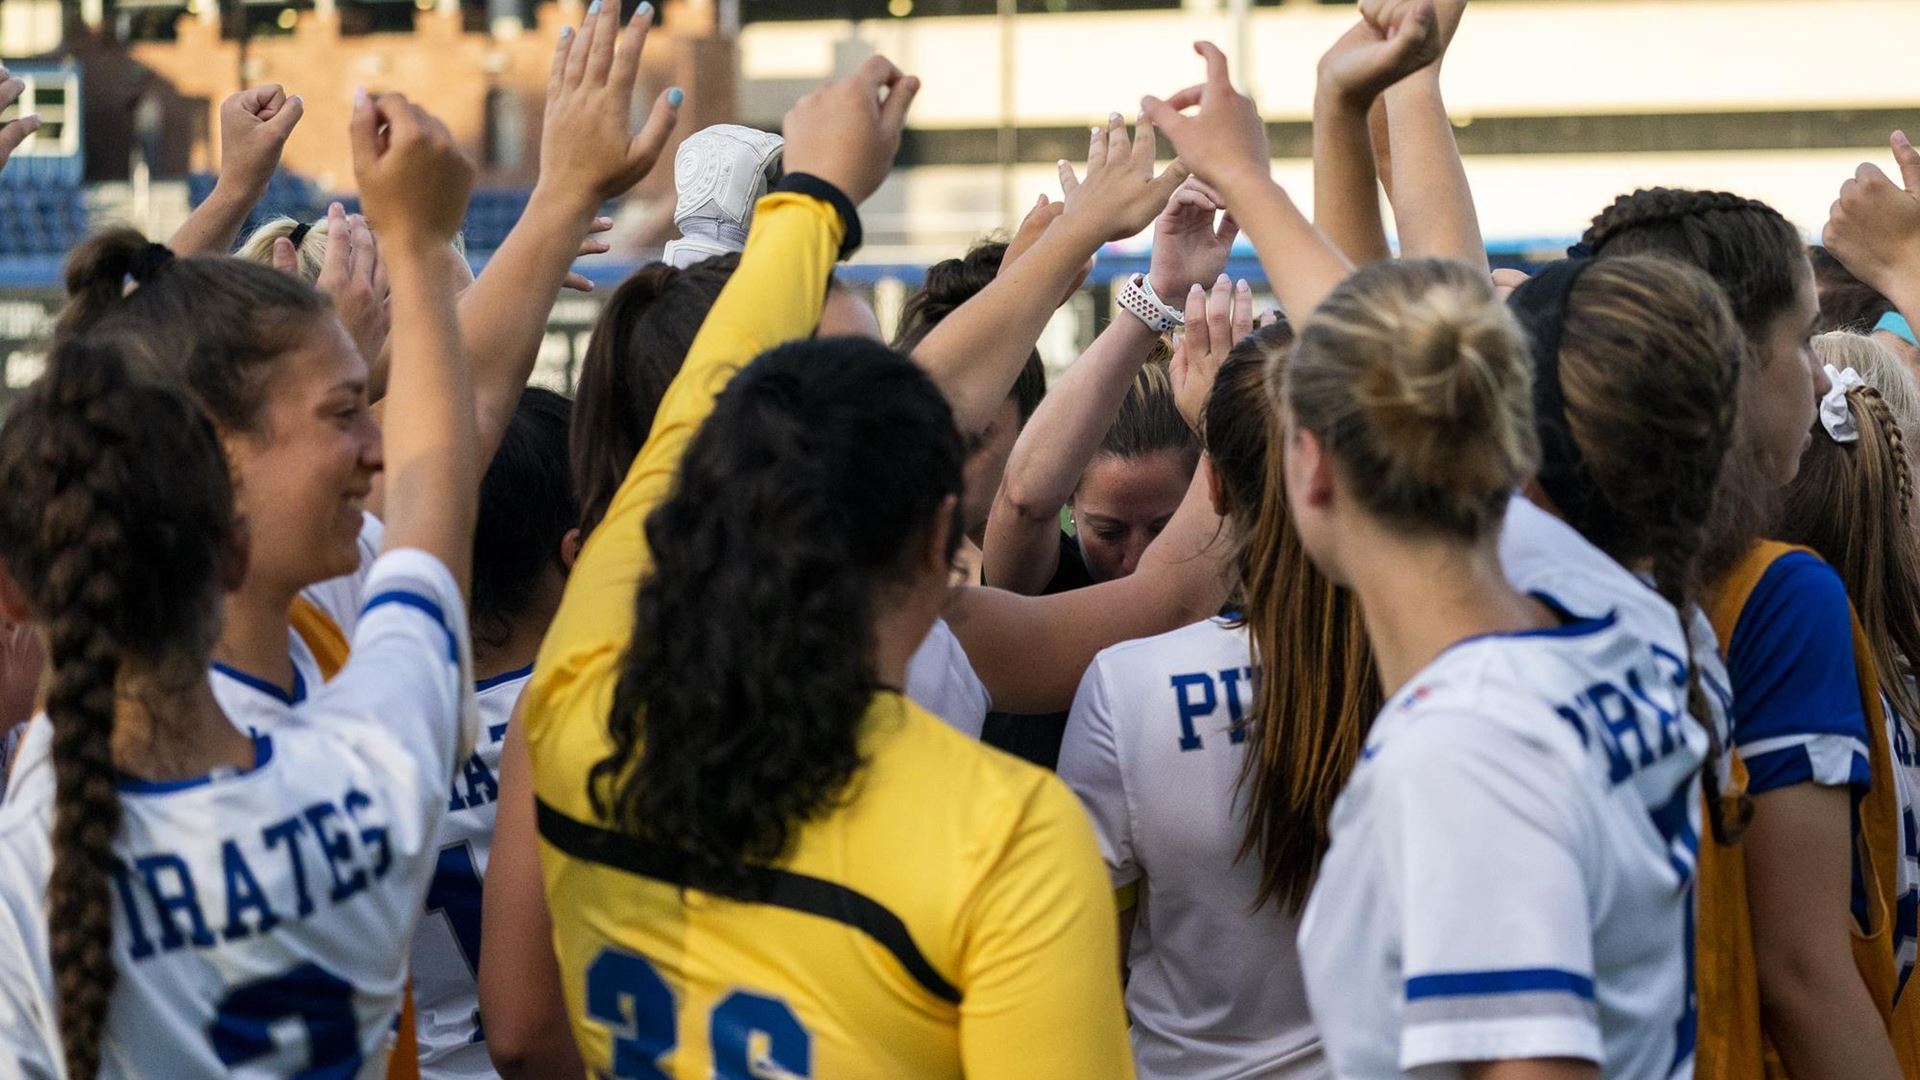 The Seton Hall women's soccer team stands in a huddle before a game.